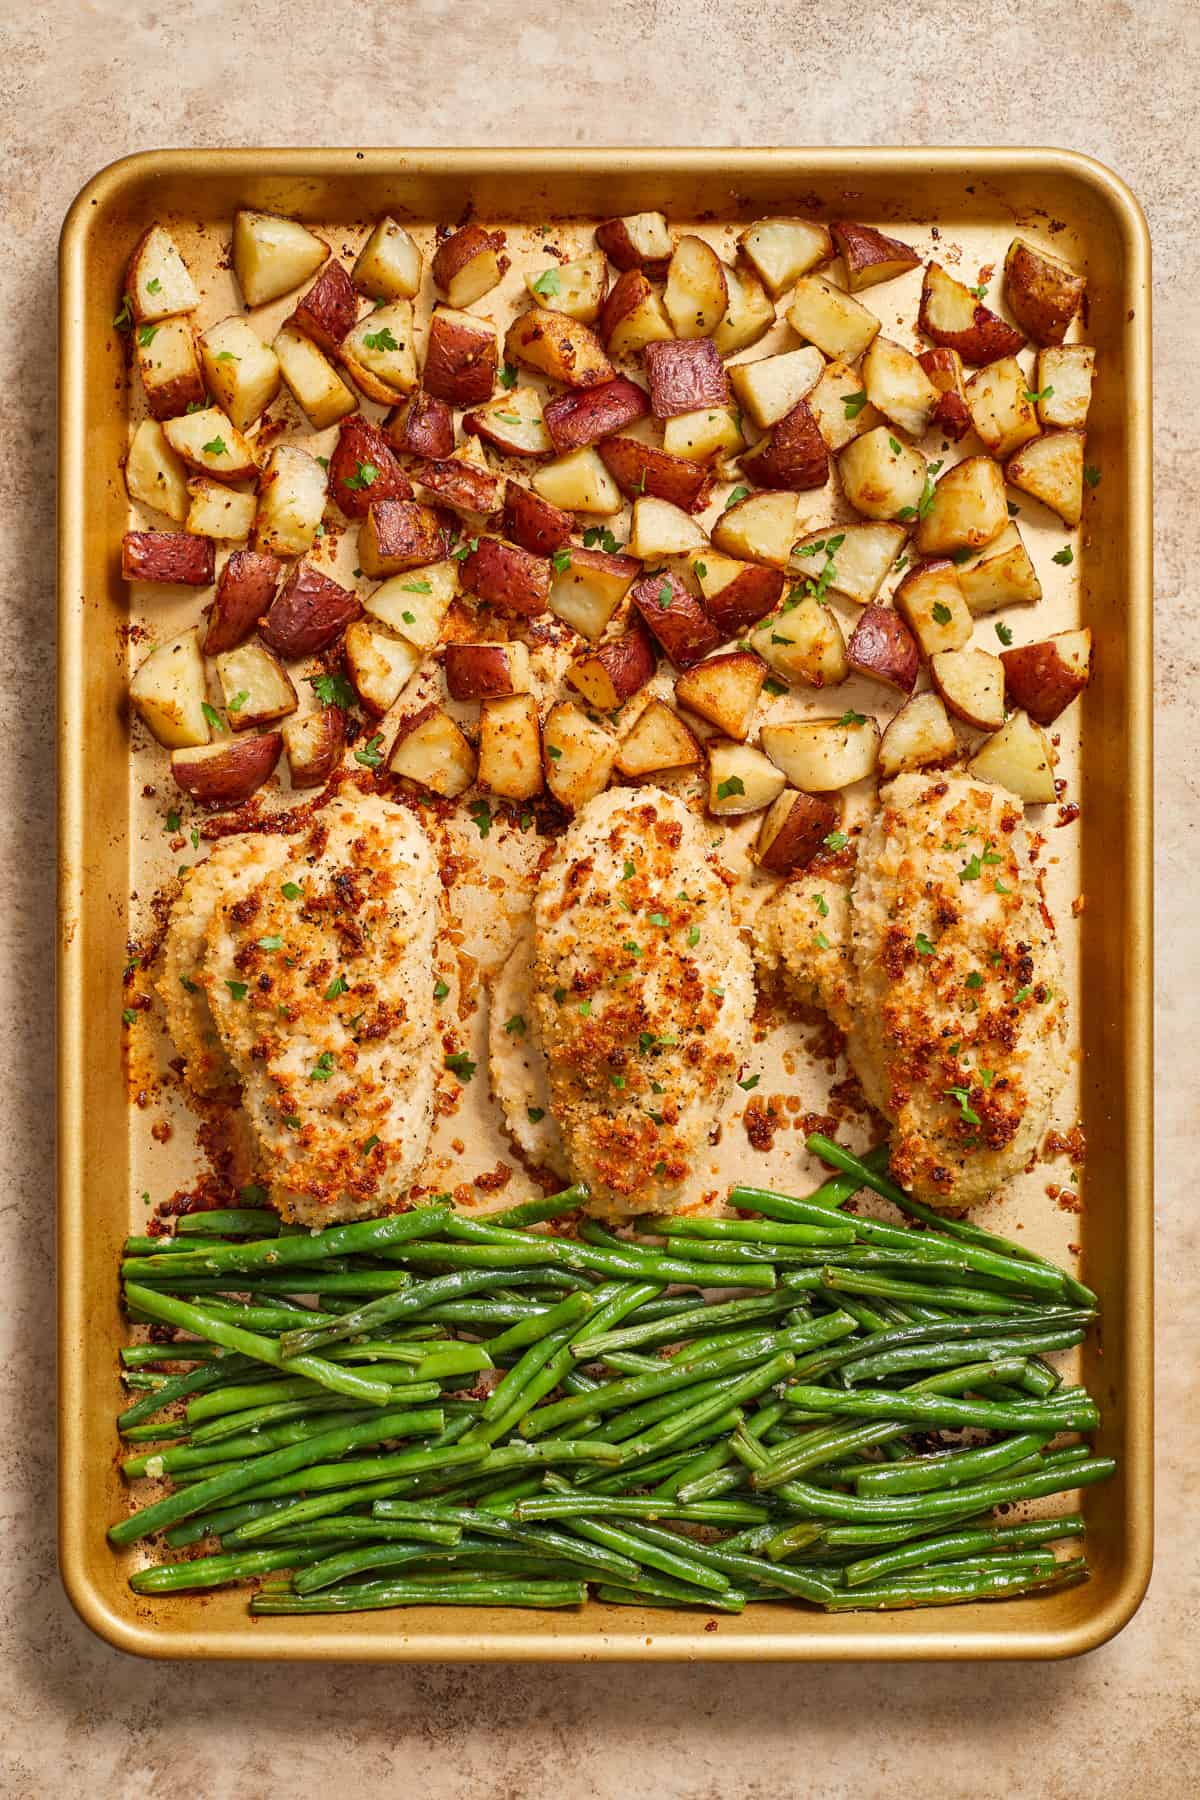 Parmesan sheet pan chicken dinner cooked with potatoes and green beans on gold pan.